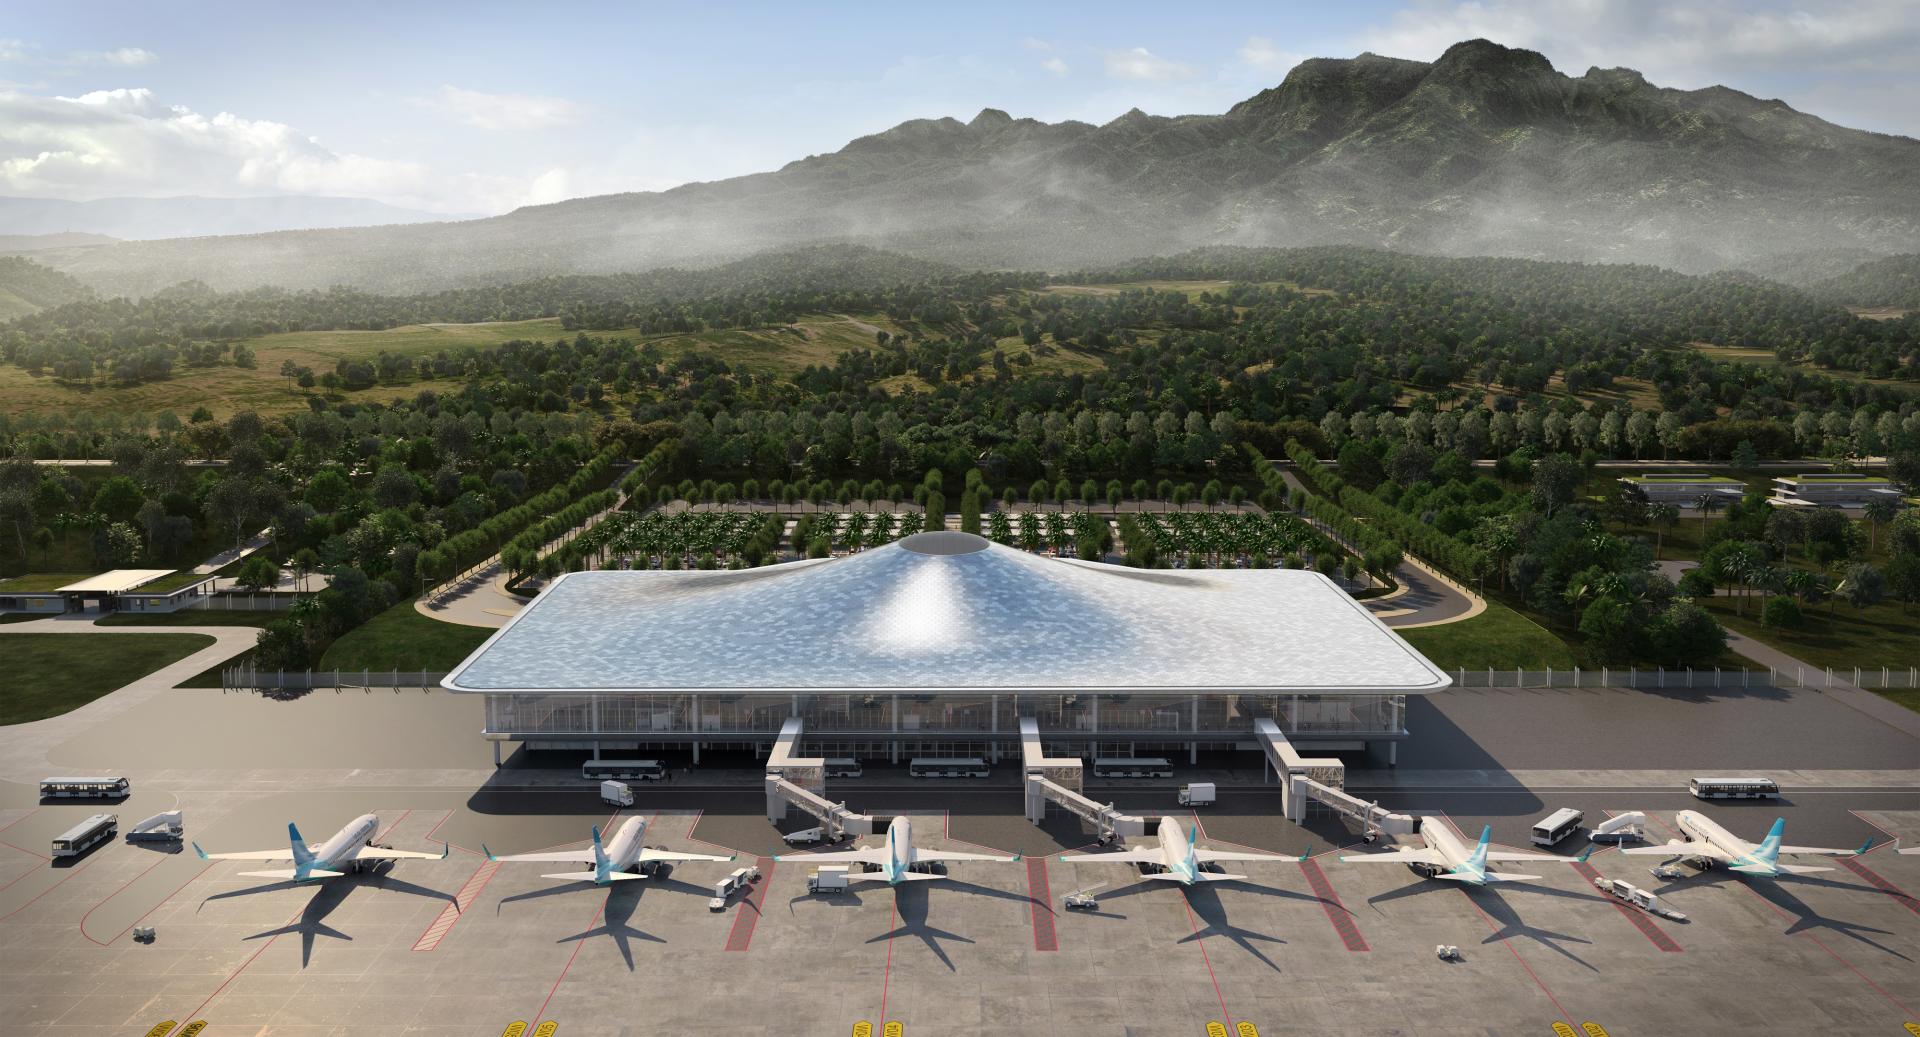 Hytera TETRA System Gets New Indonesian Airport Off To A Flying Start